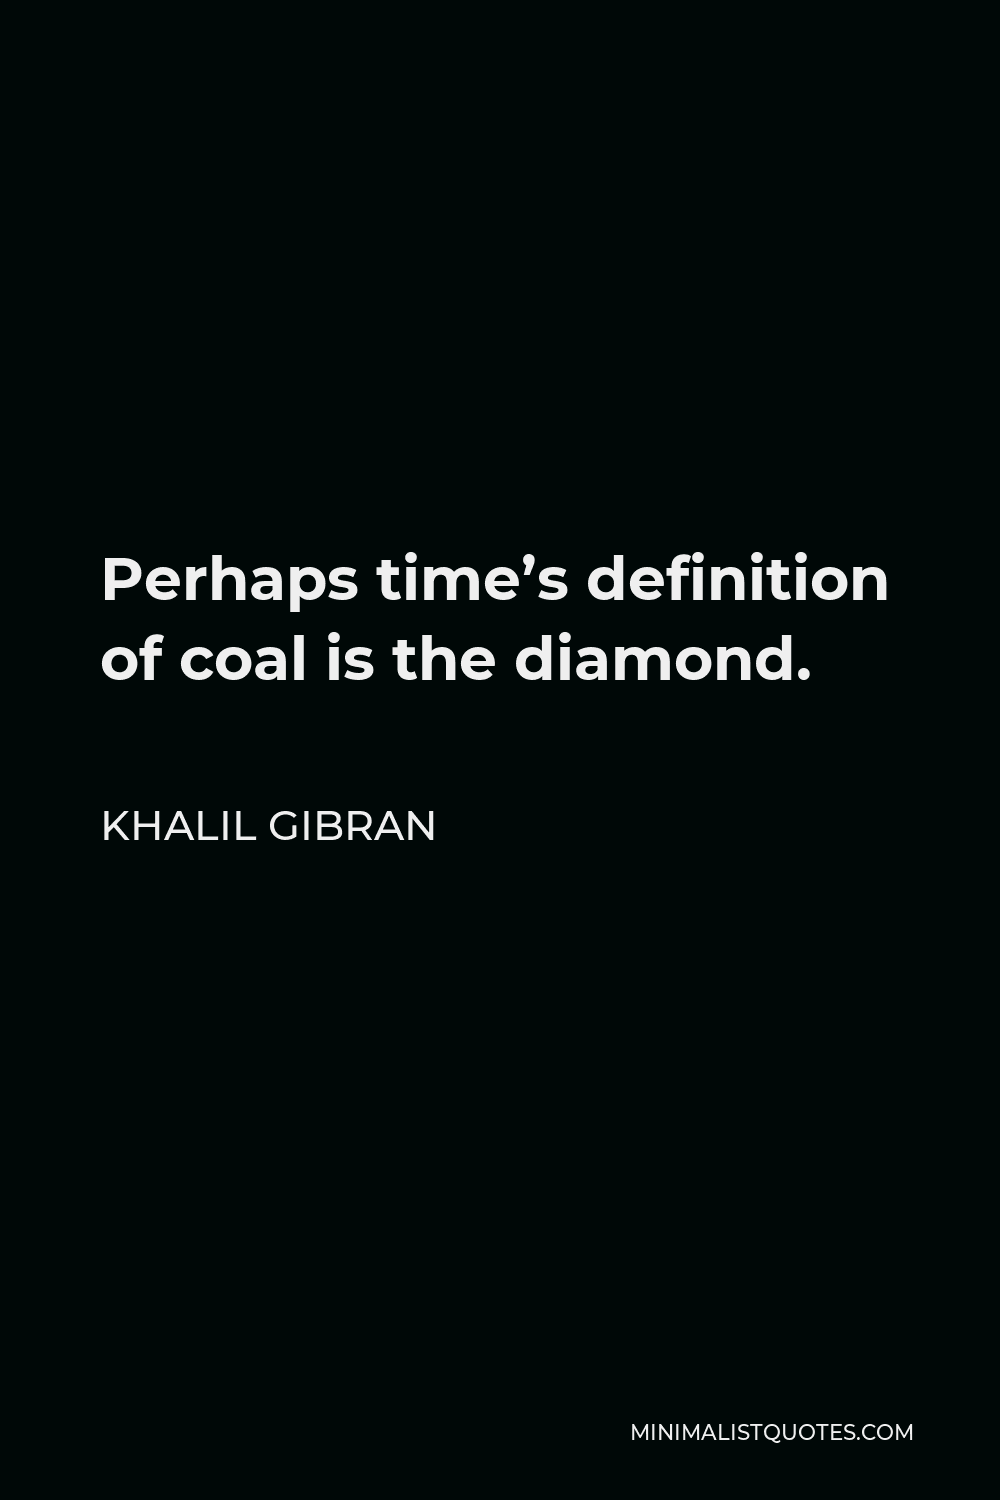 Khalil Gibran Quote - Perhaps time’s definition of coal is the diamond.